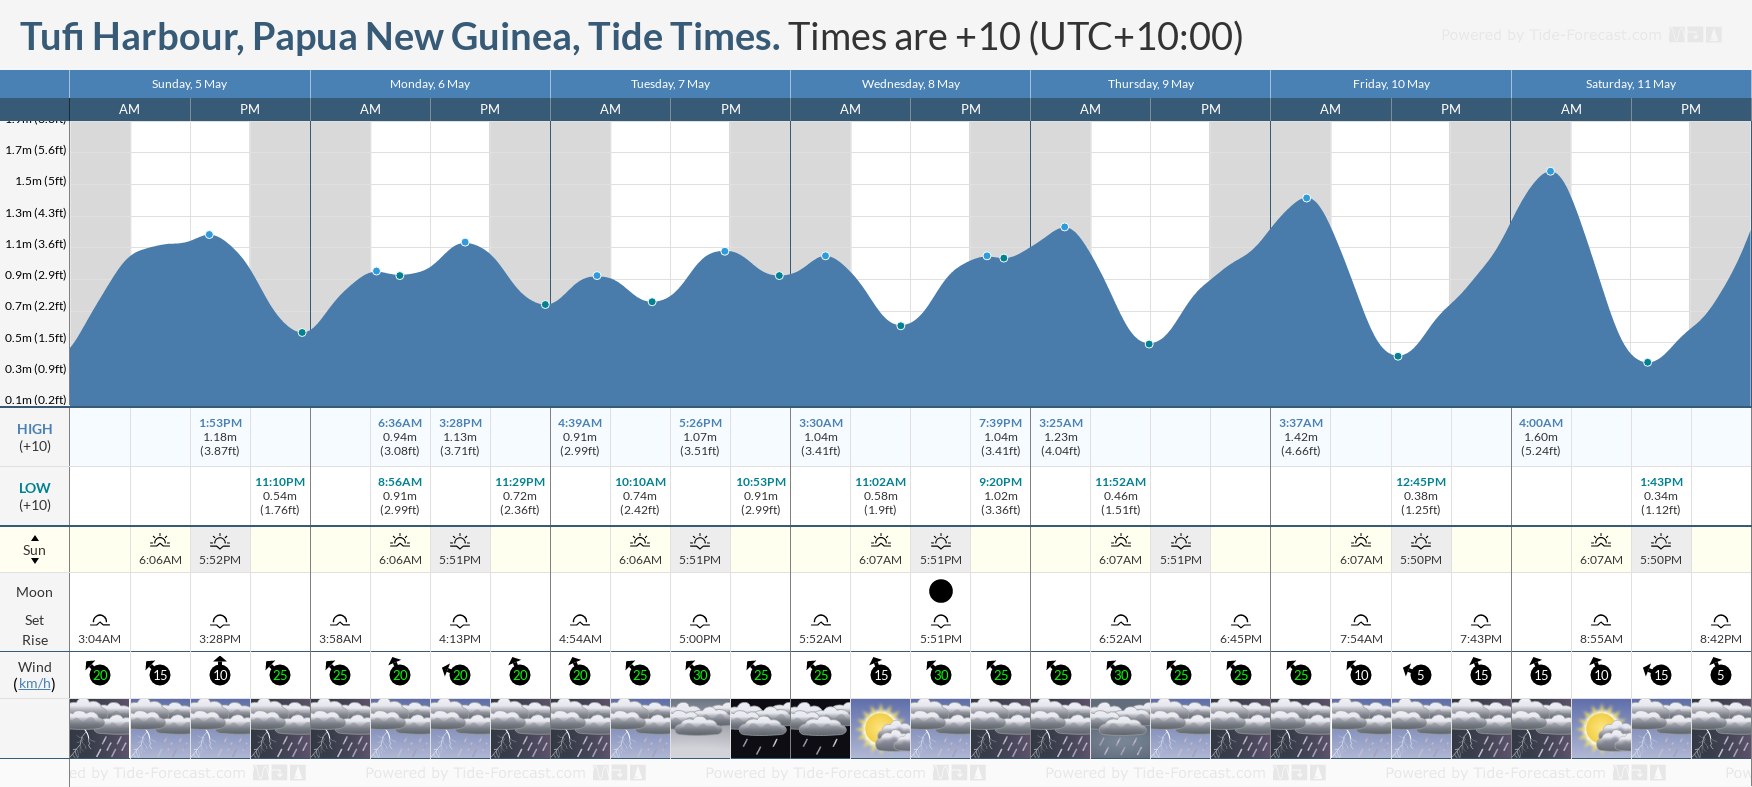 Tufi Harbour, Papua New Guinea Tide Chart including high and low tide tide times for the next 7 days